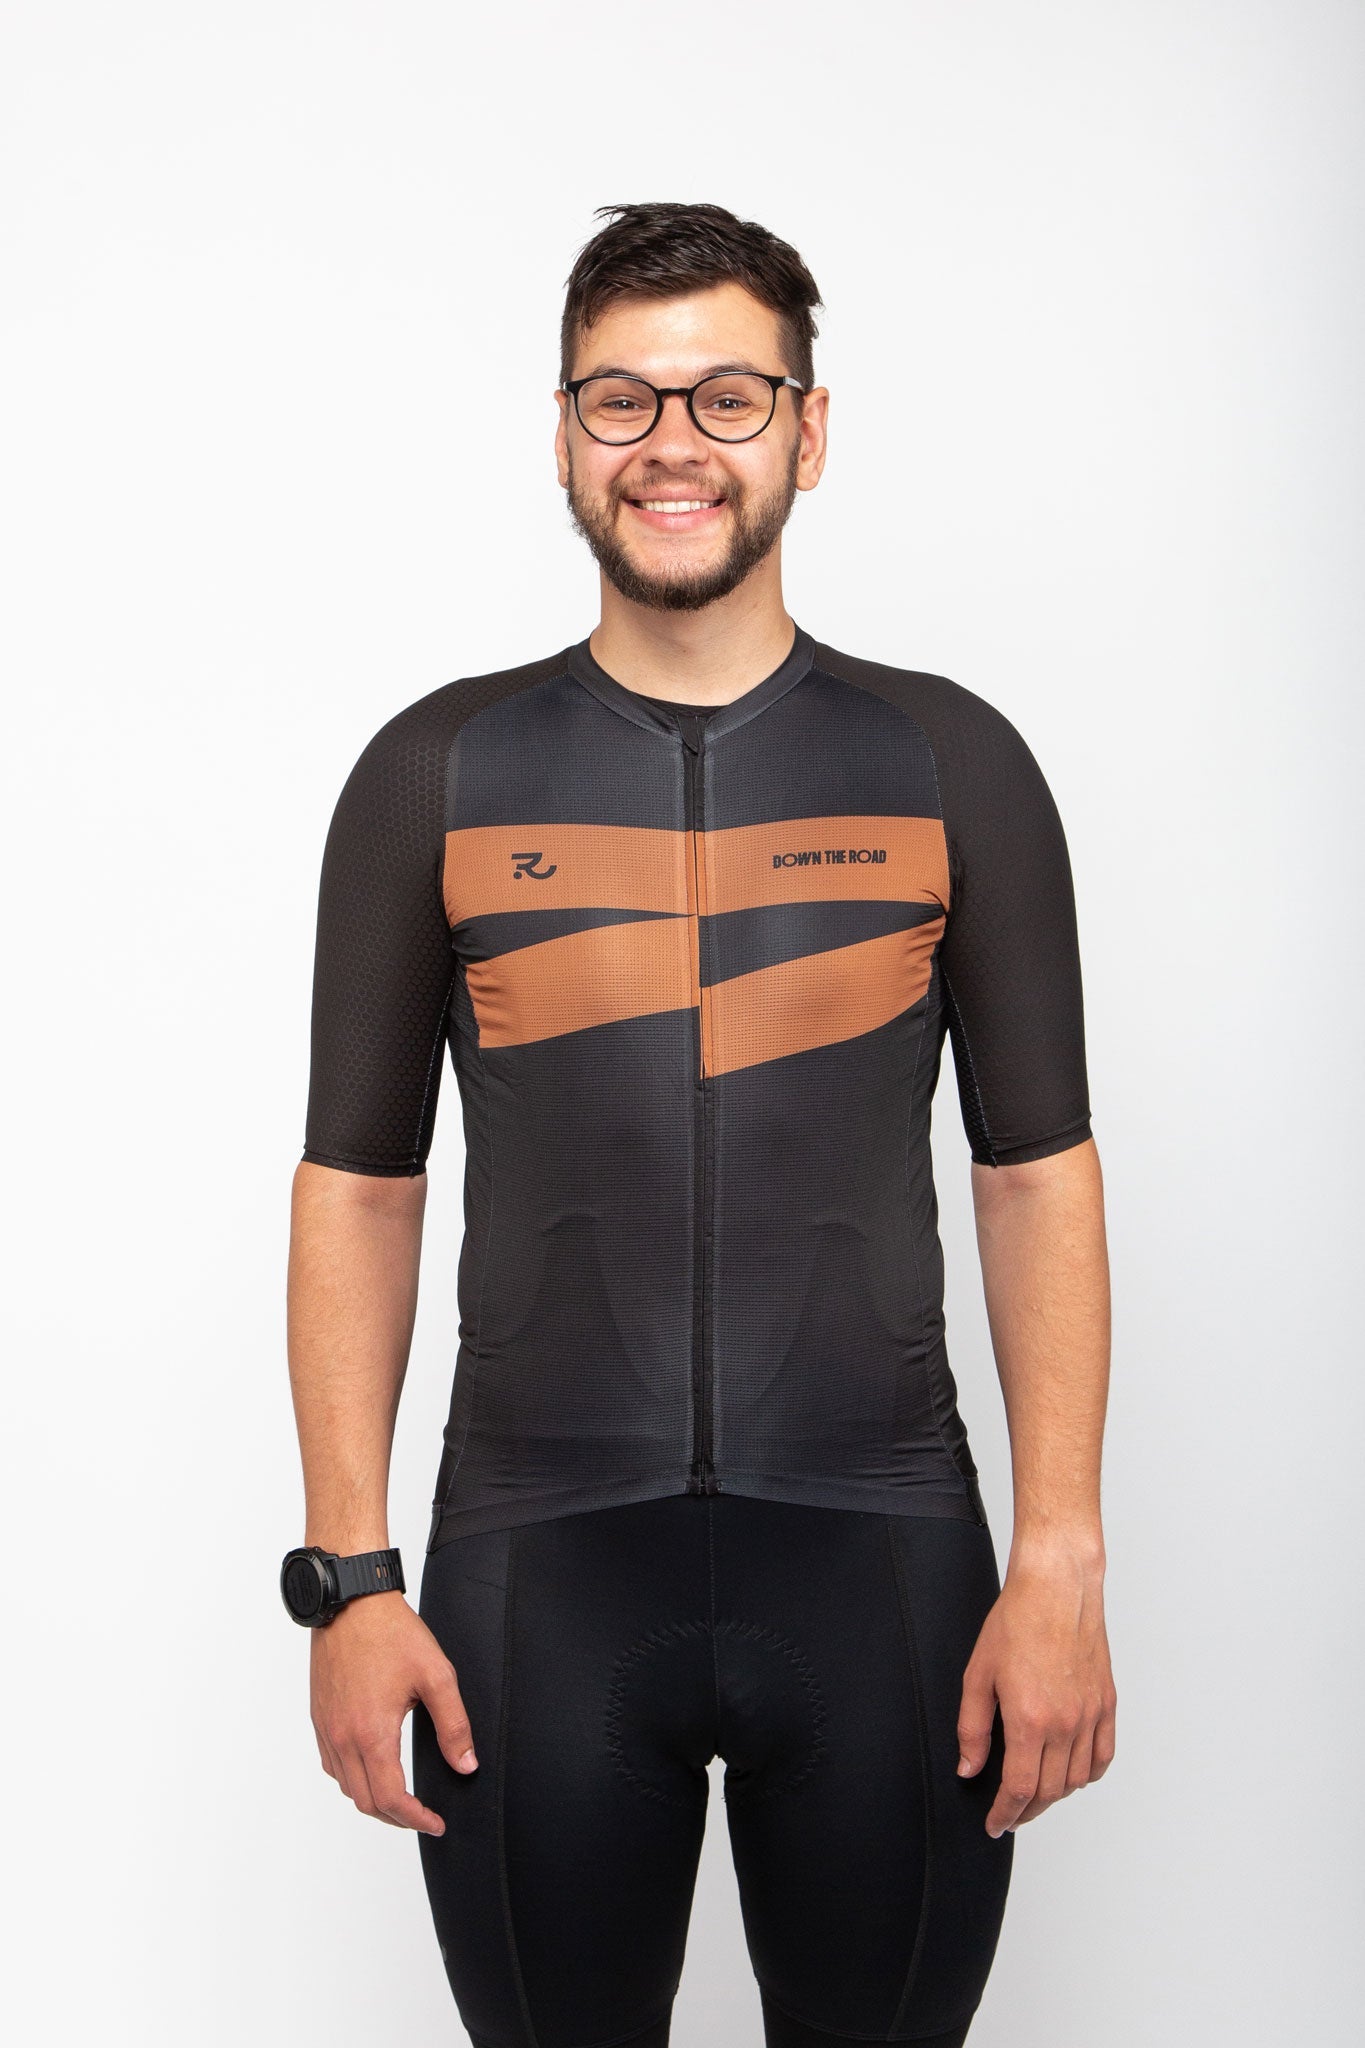 front of black jersey with brown details